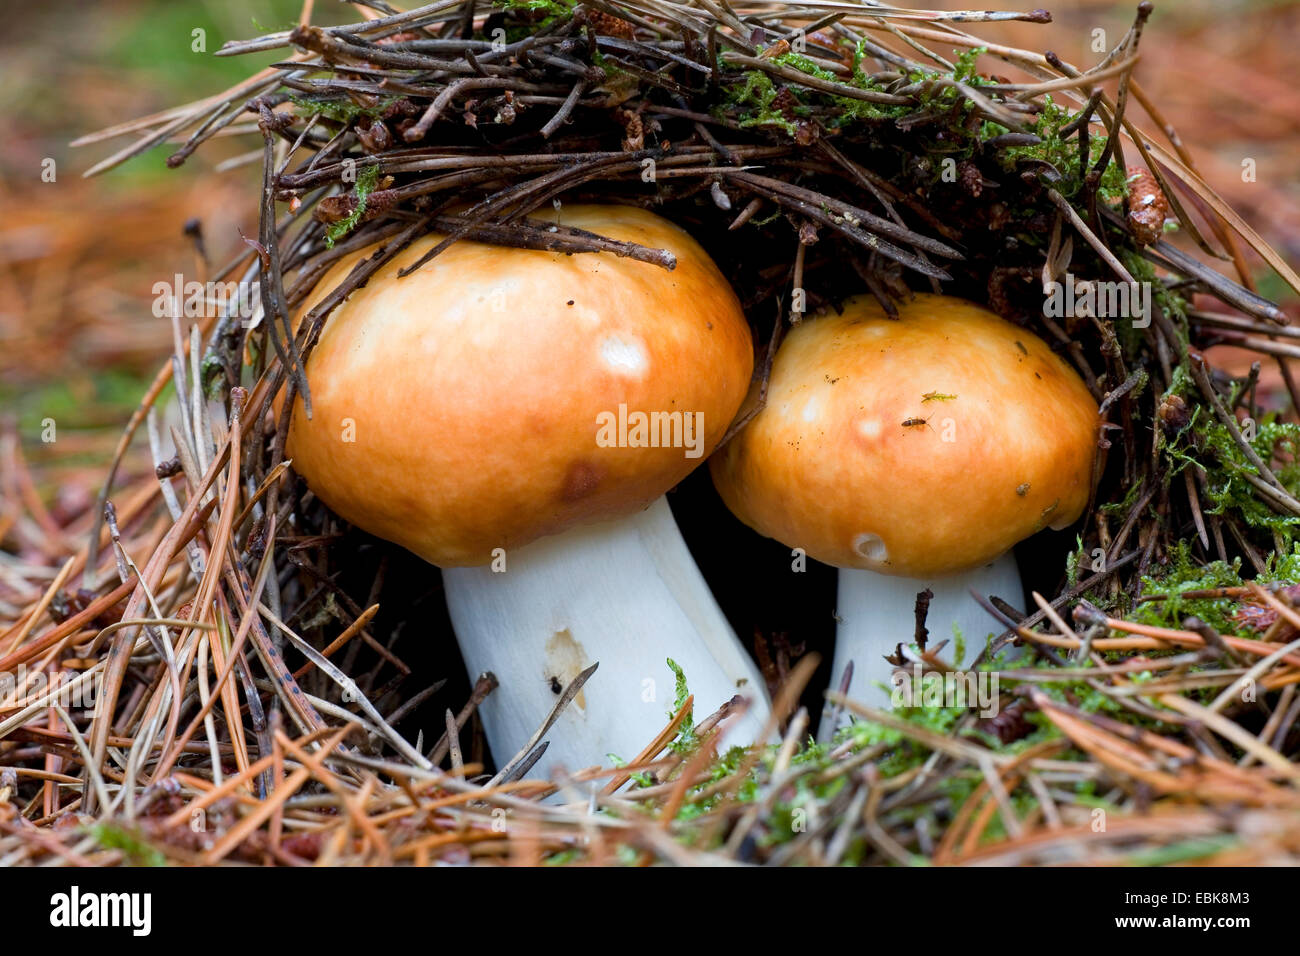 Copper brittlegill, Red-capped Russula  (Russula decolorans), on forestground with pine needles, Denmark, Jylland Stock Photo